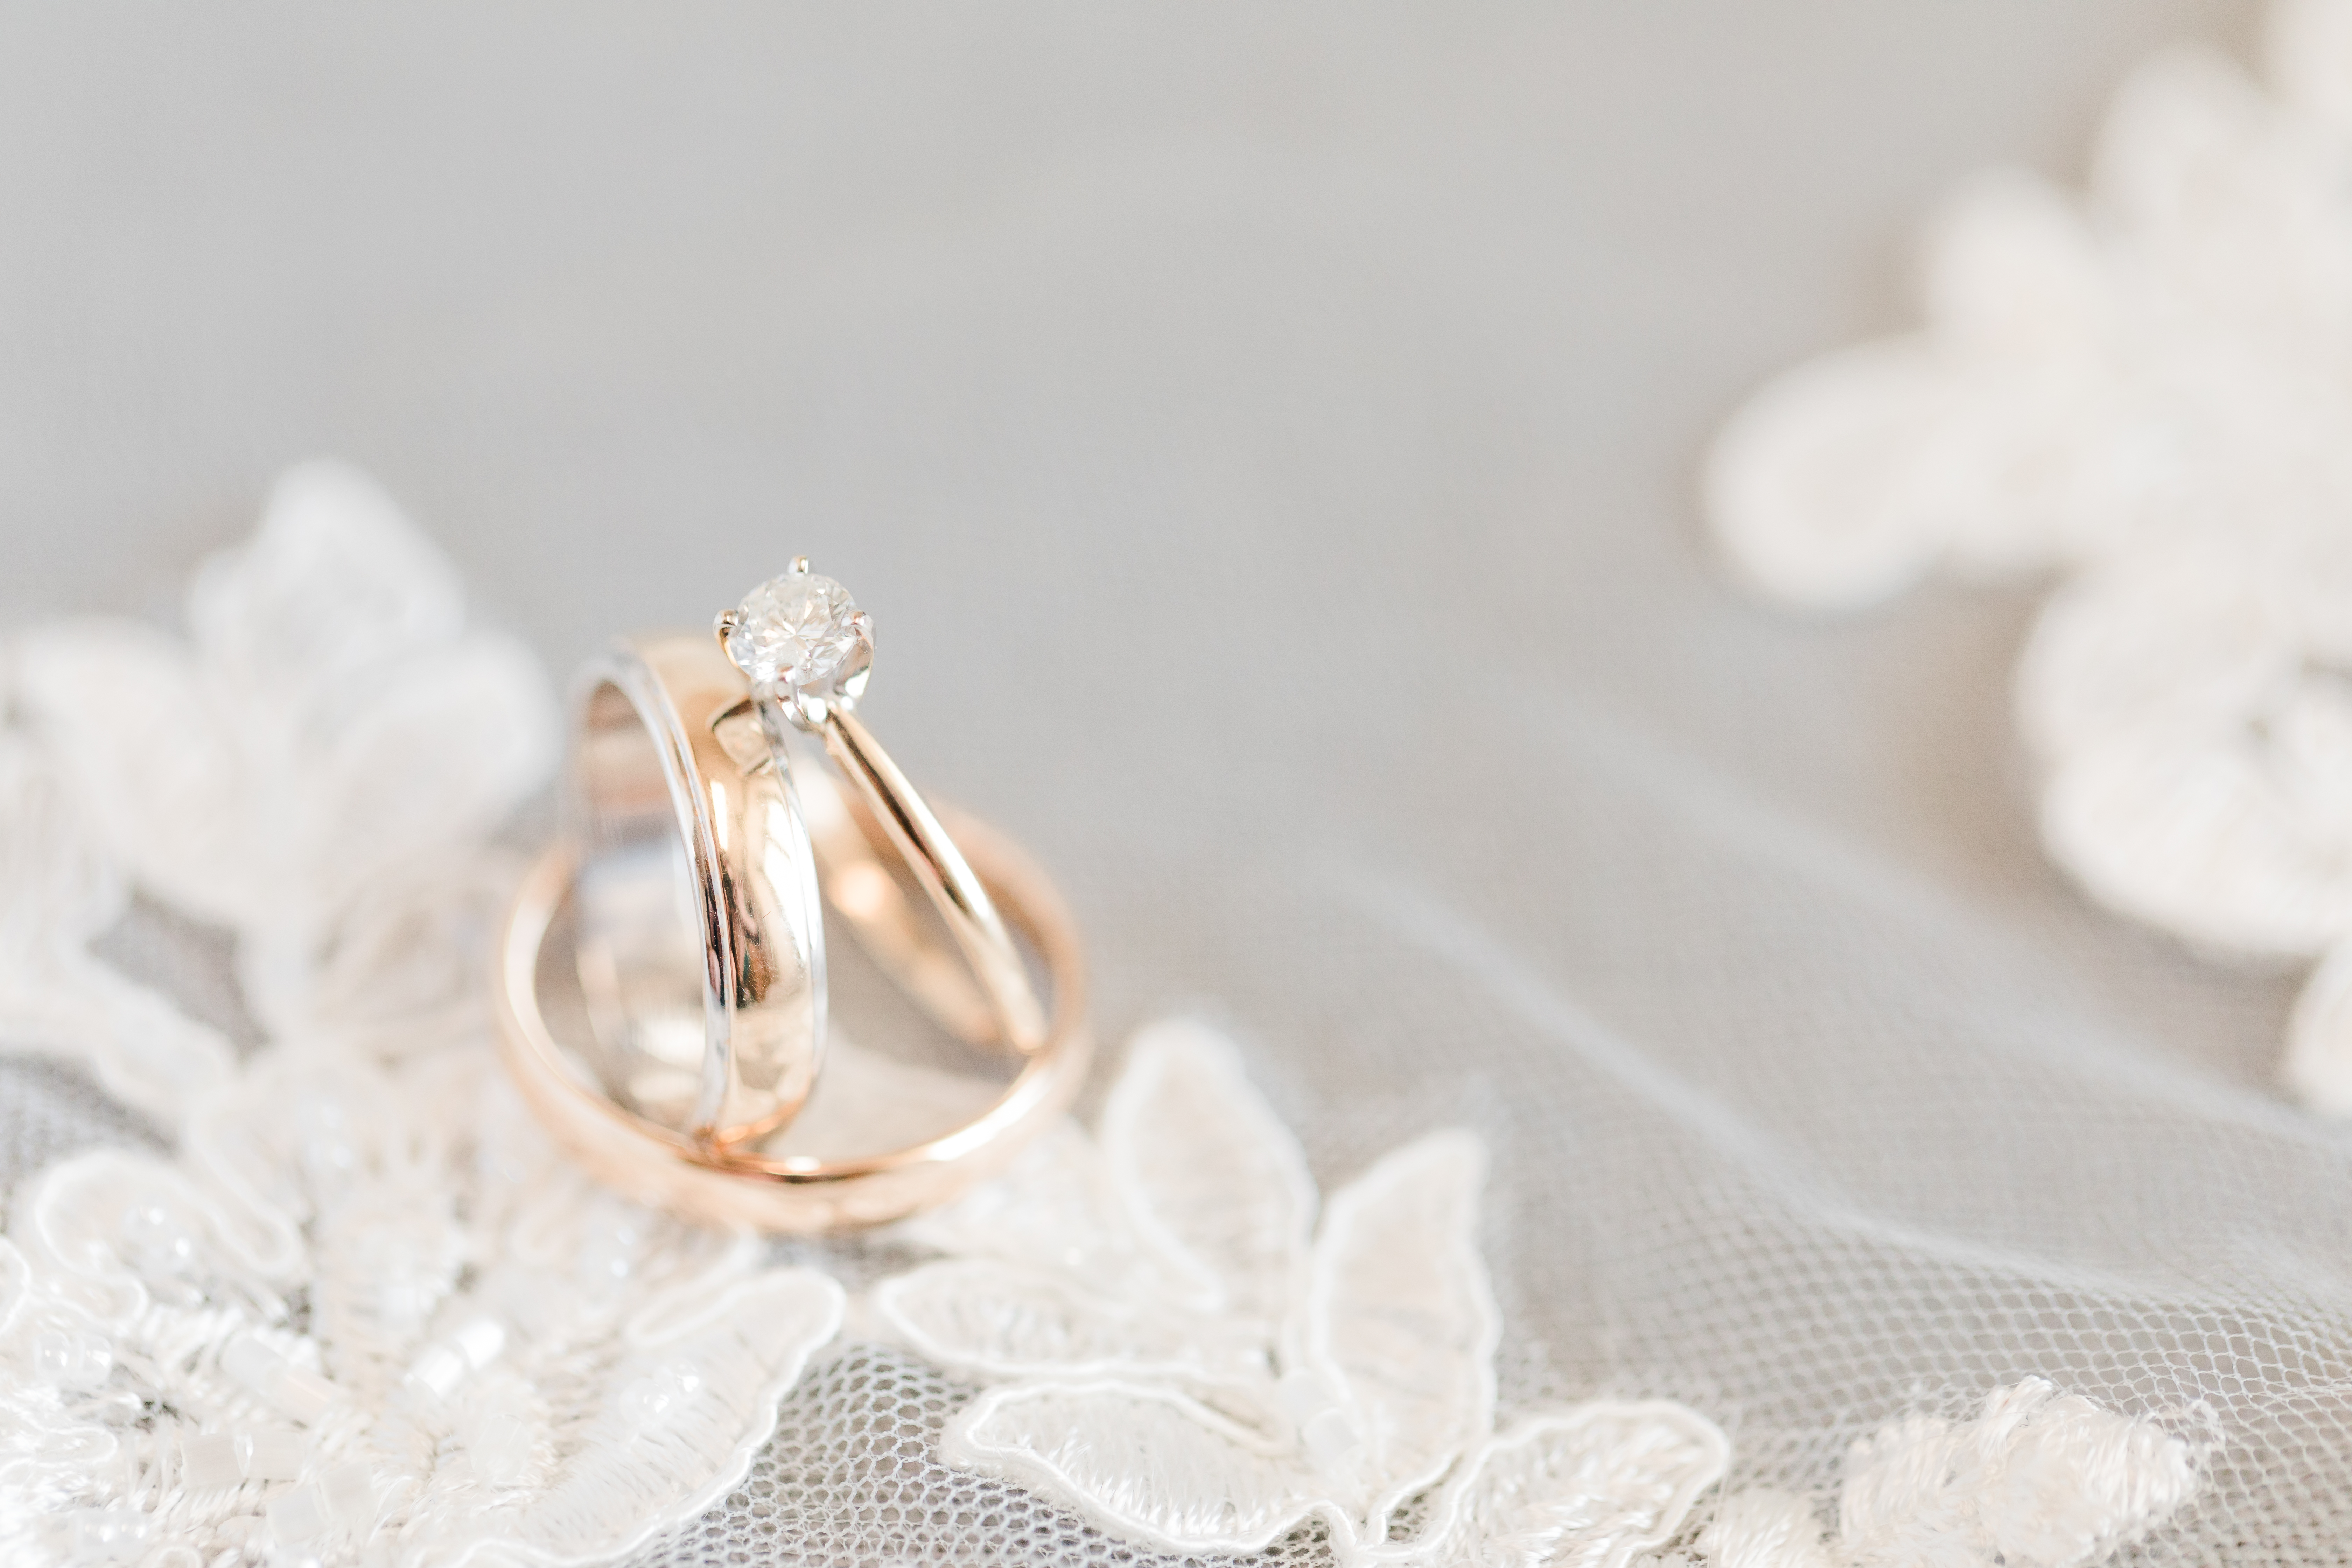 An engagement ring on a simple background